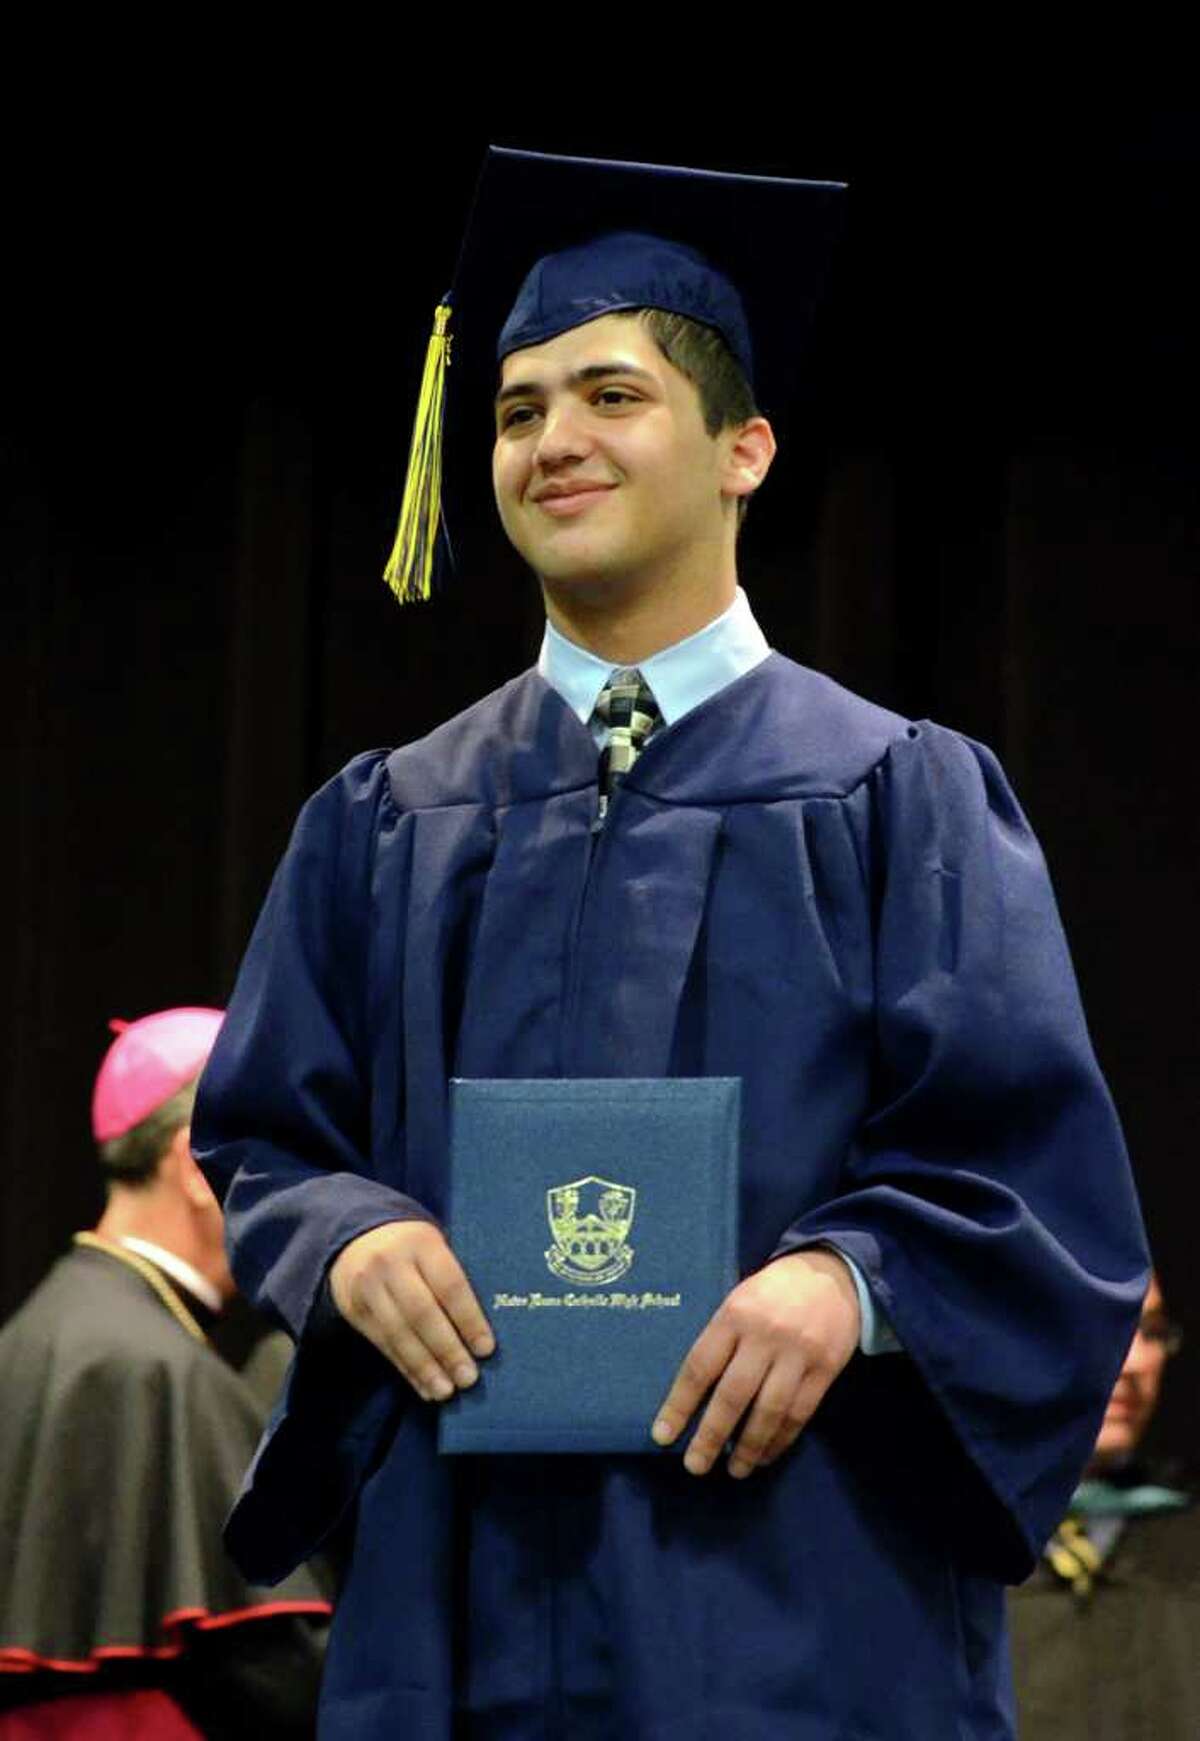 Scott Barrese holds his diploma during the 2011 Notre Dame Catholic High School Commencement at Notre Dame in Fairfield on Saturday, June 4, 2011.